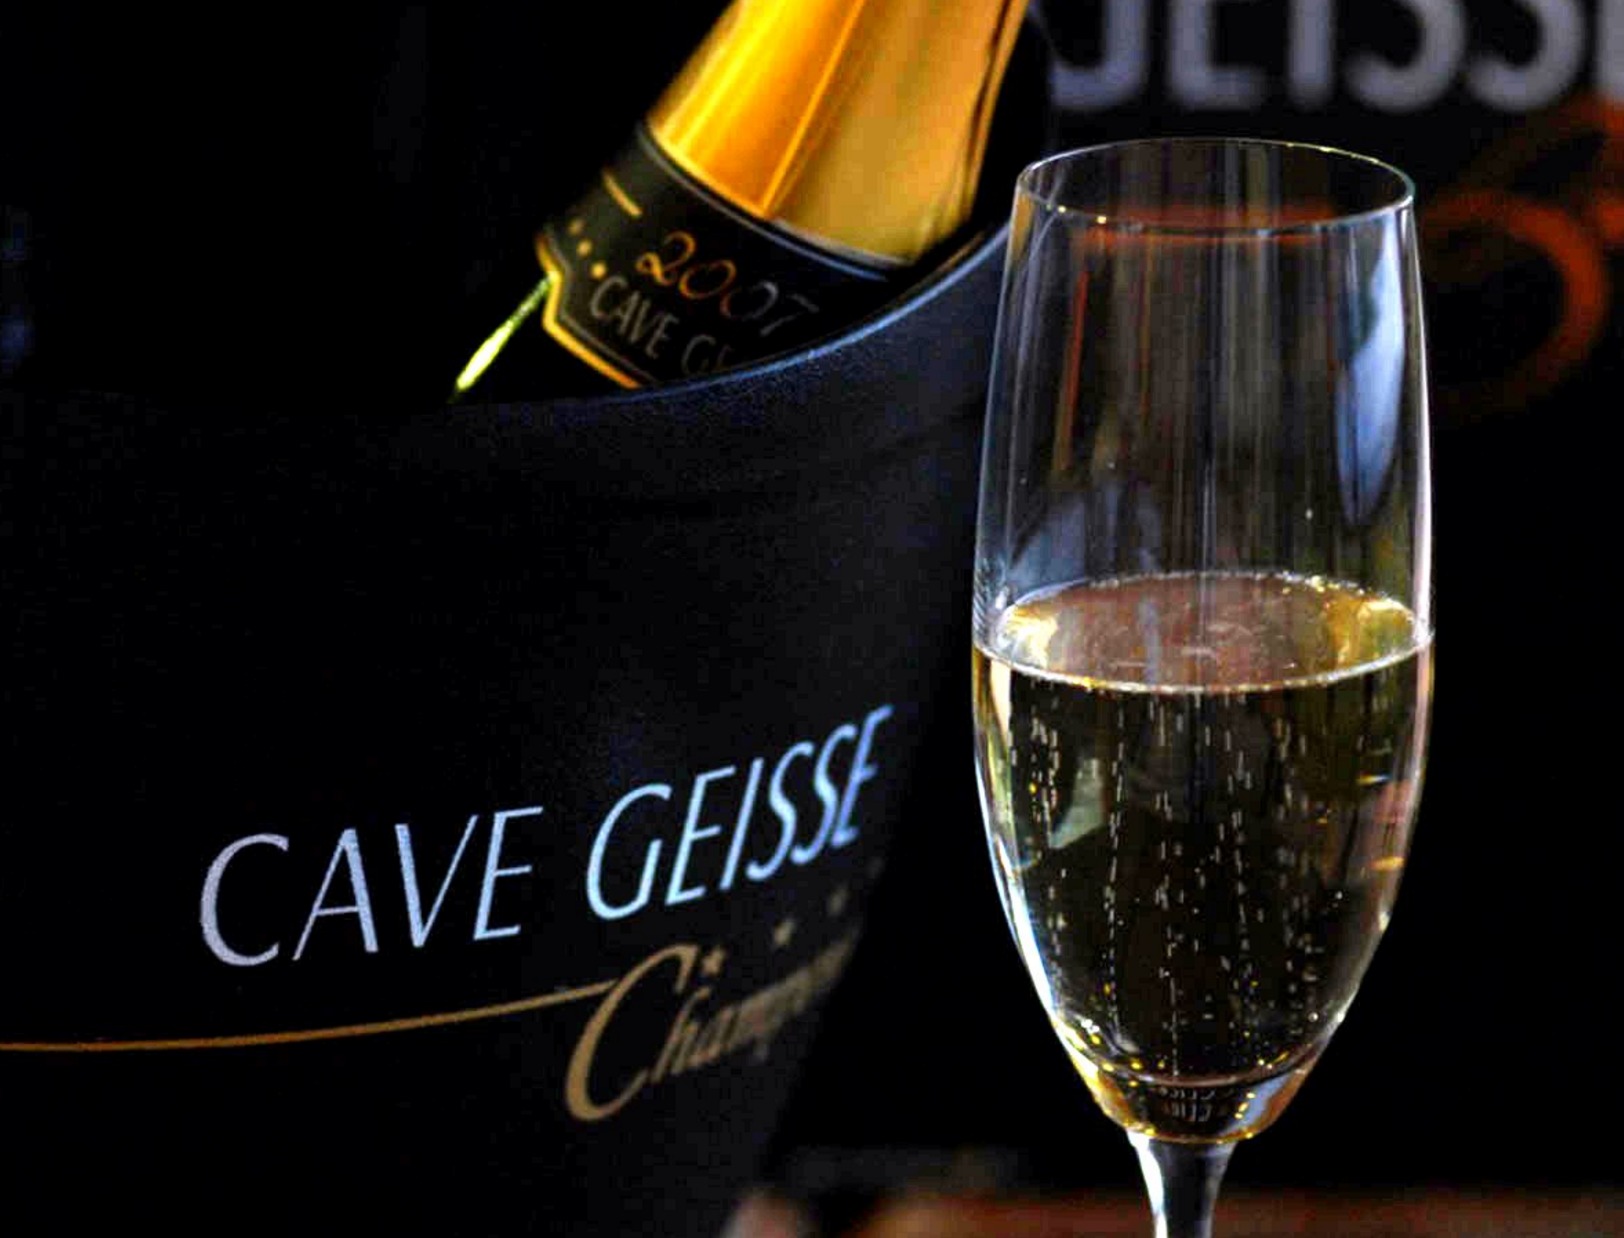 Cave Geisse winery, Guide South America